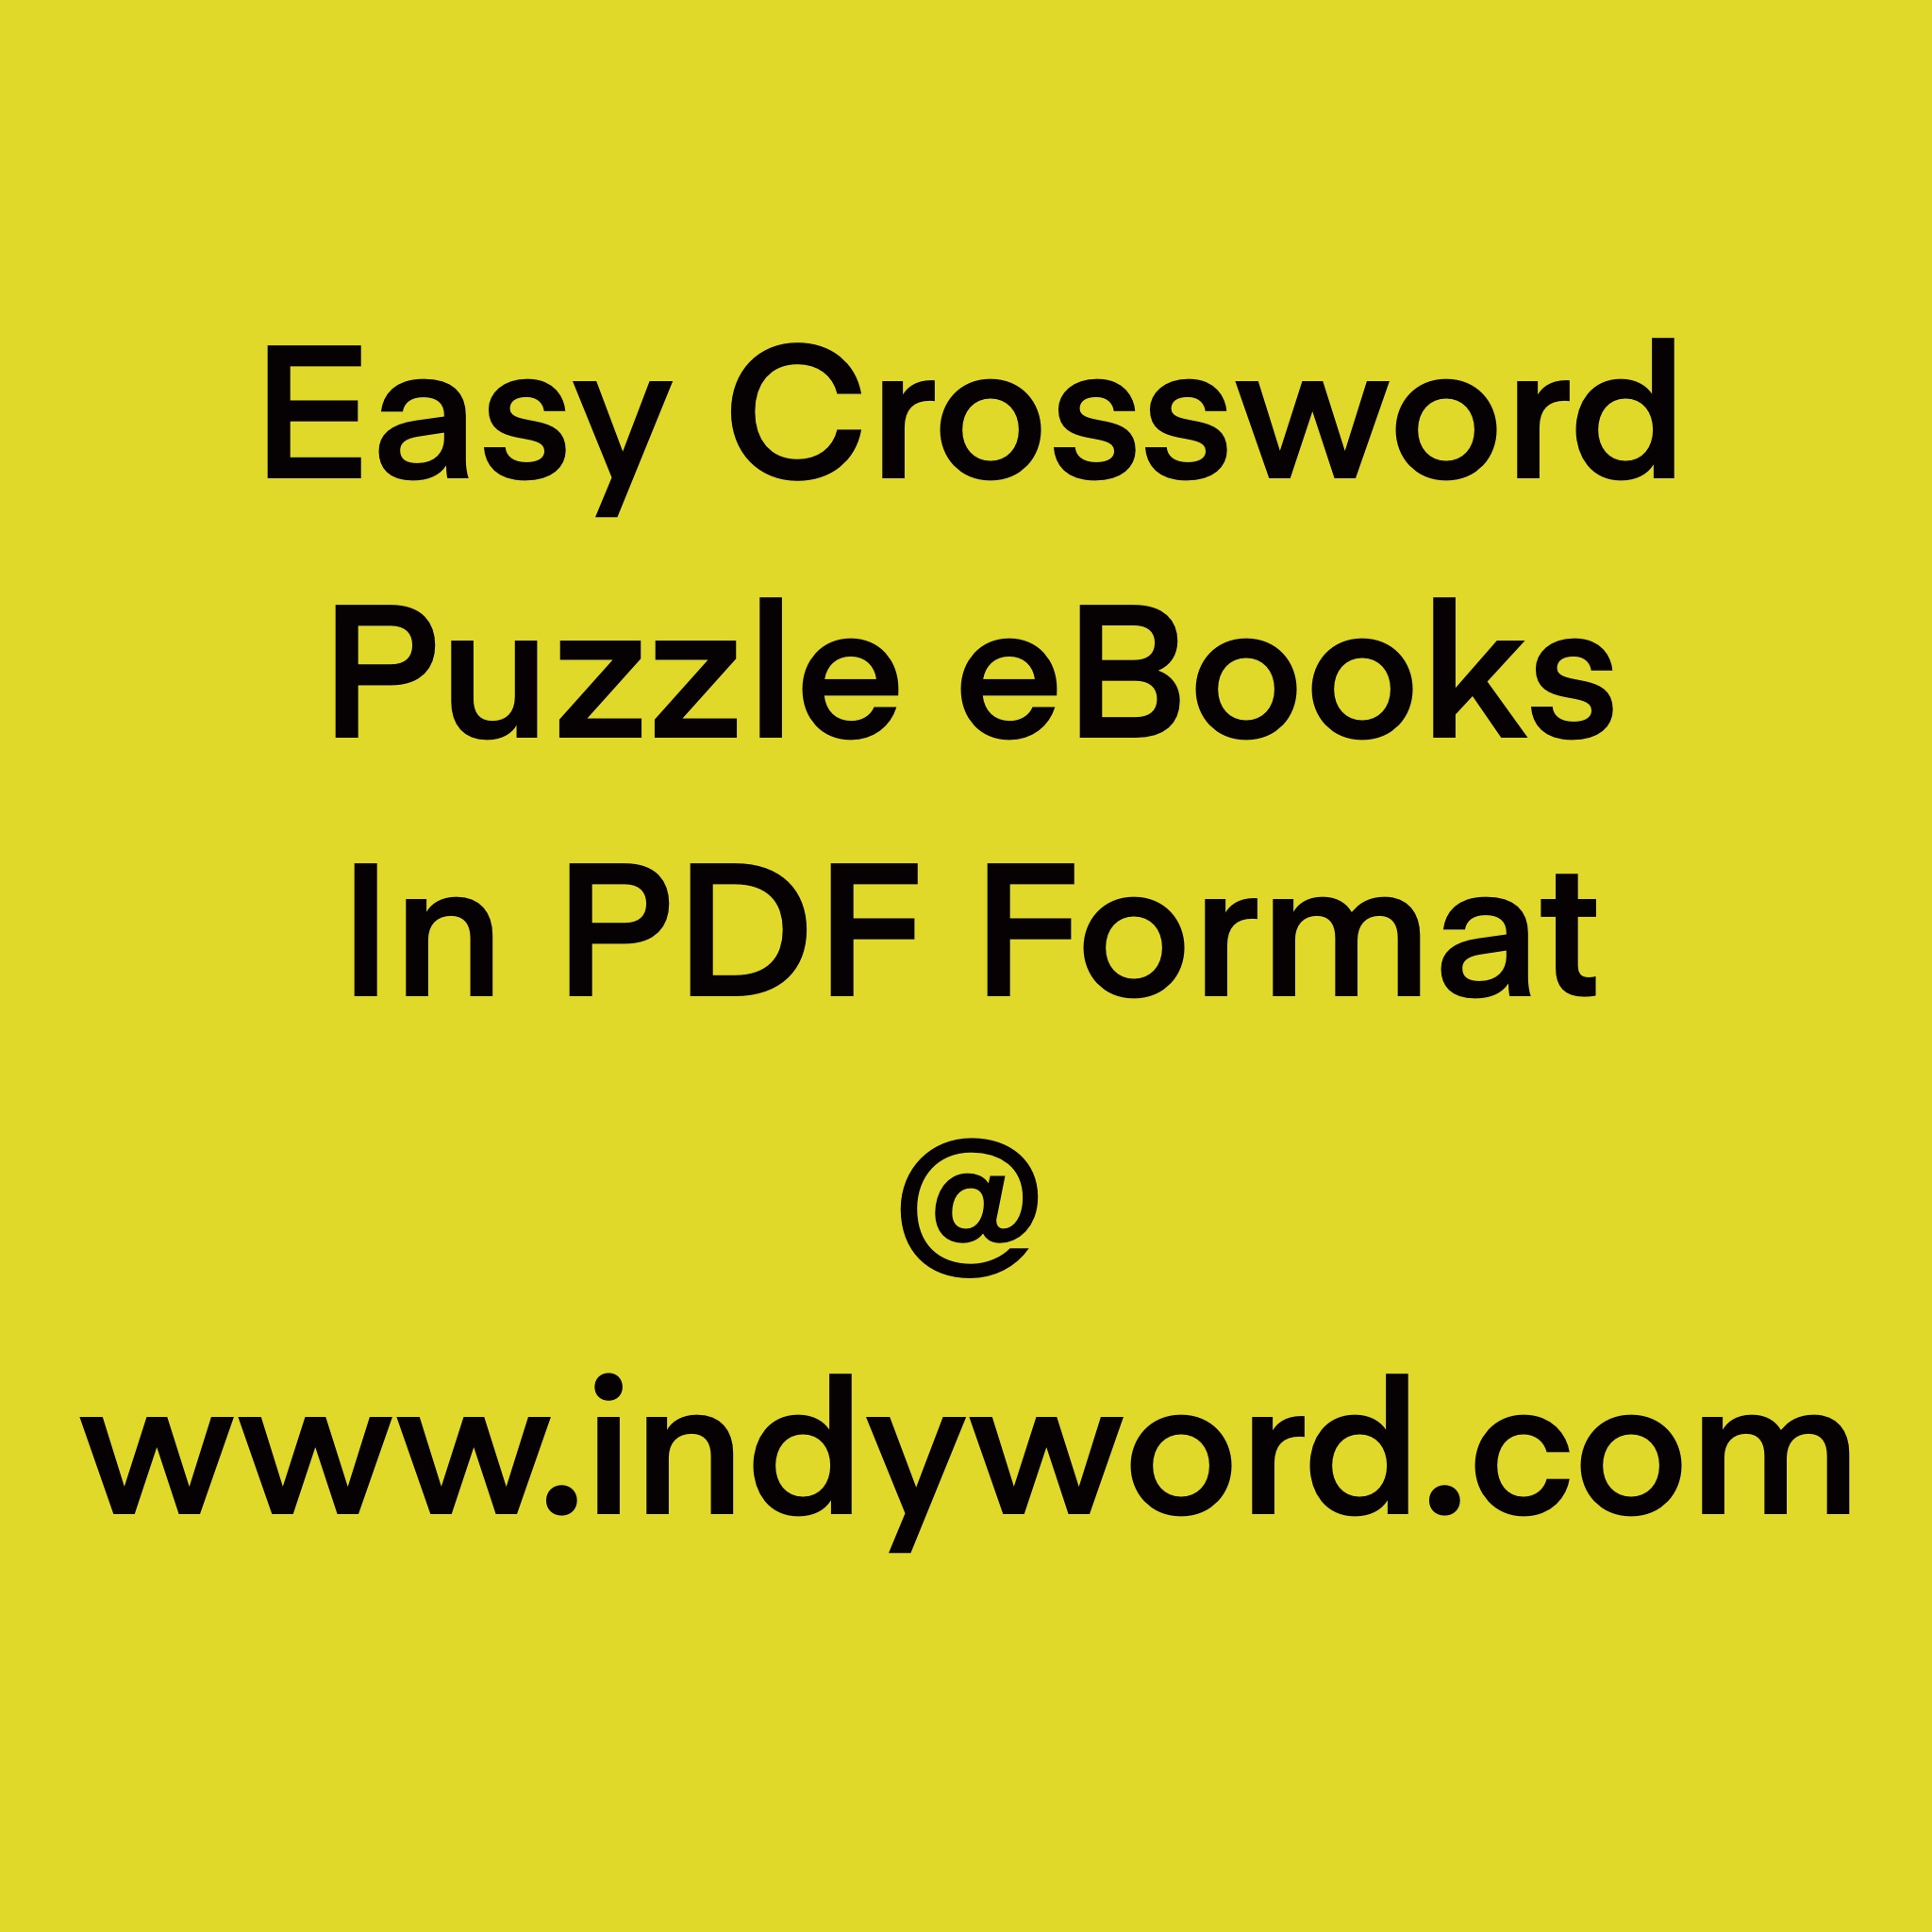 Where Could I Buy an Easy Crossword Puzzle eBook in PDF Format ? Click Here.